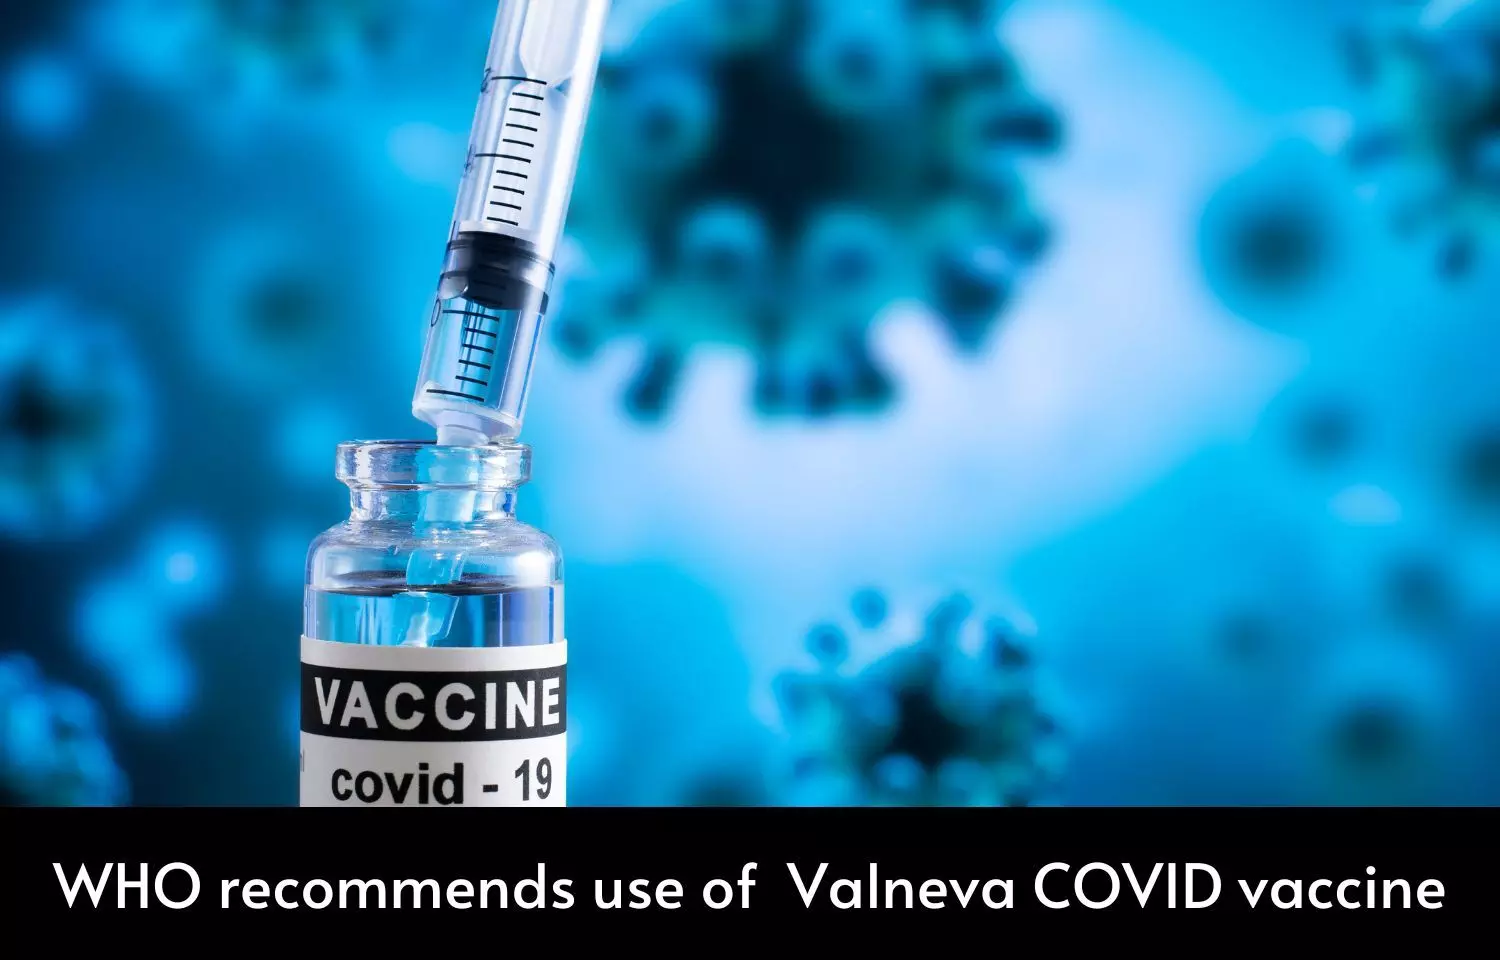 Valneva COVID vaccine recommended by WHO